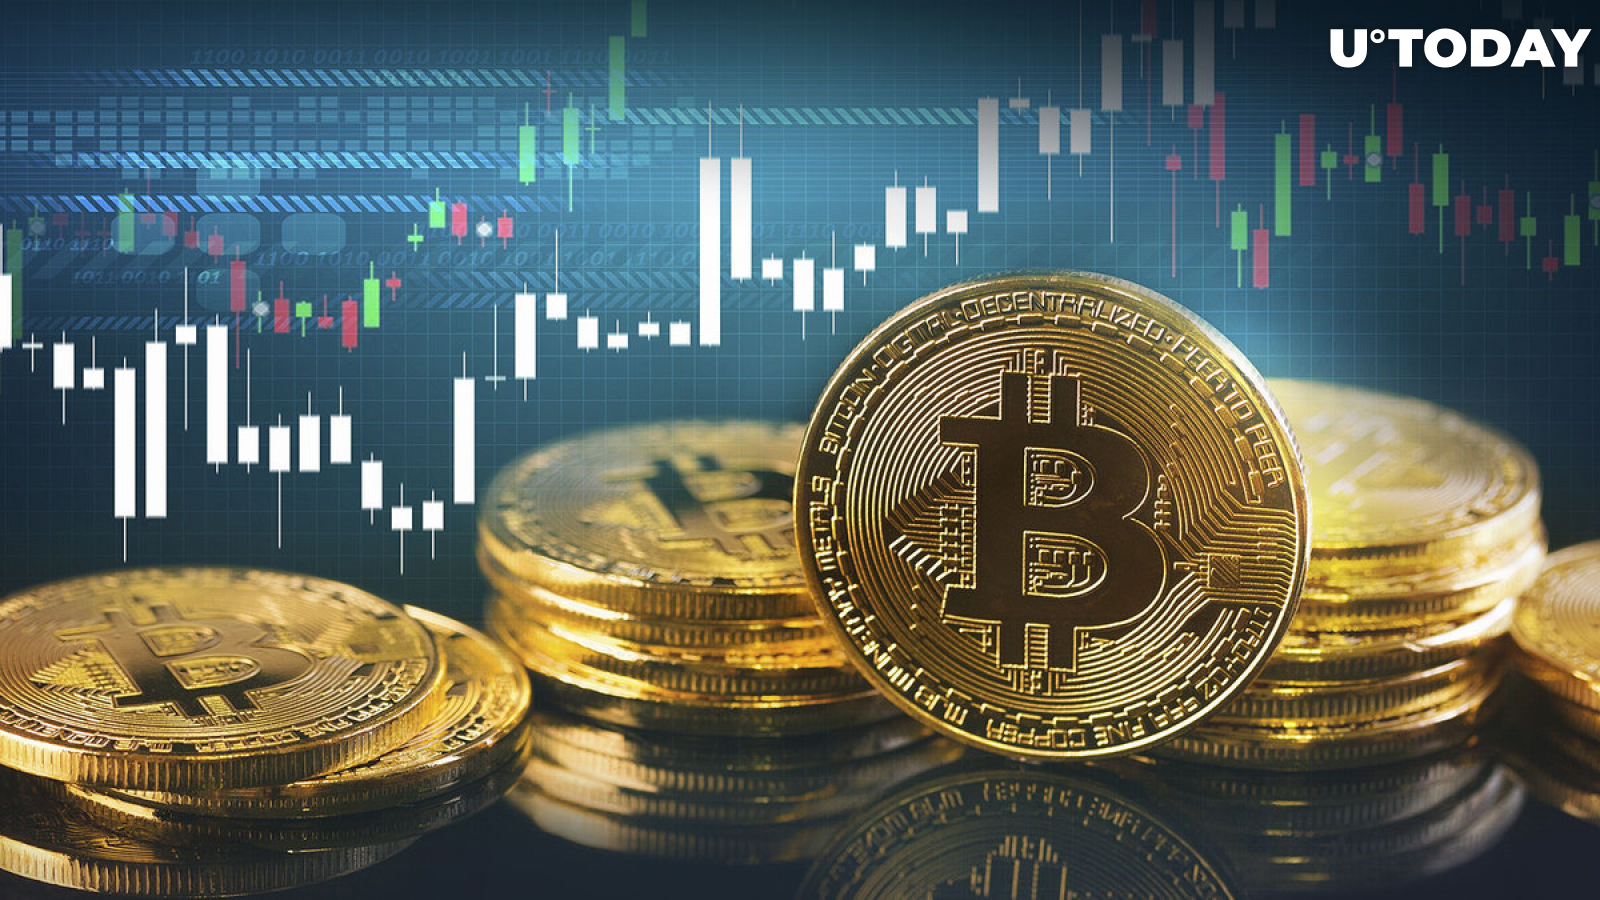 Bitcoin (BTC) Prints Extremely Important Signal That Historically Led to Massive Rallies